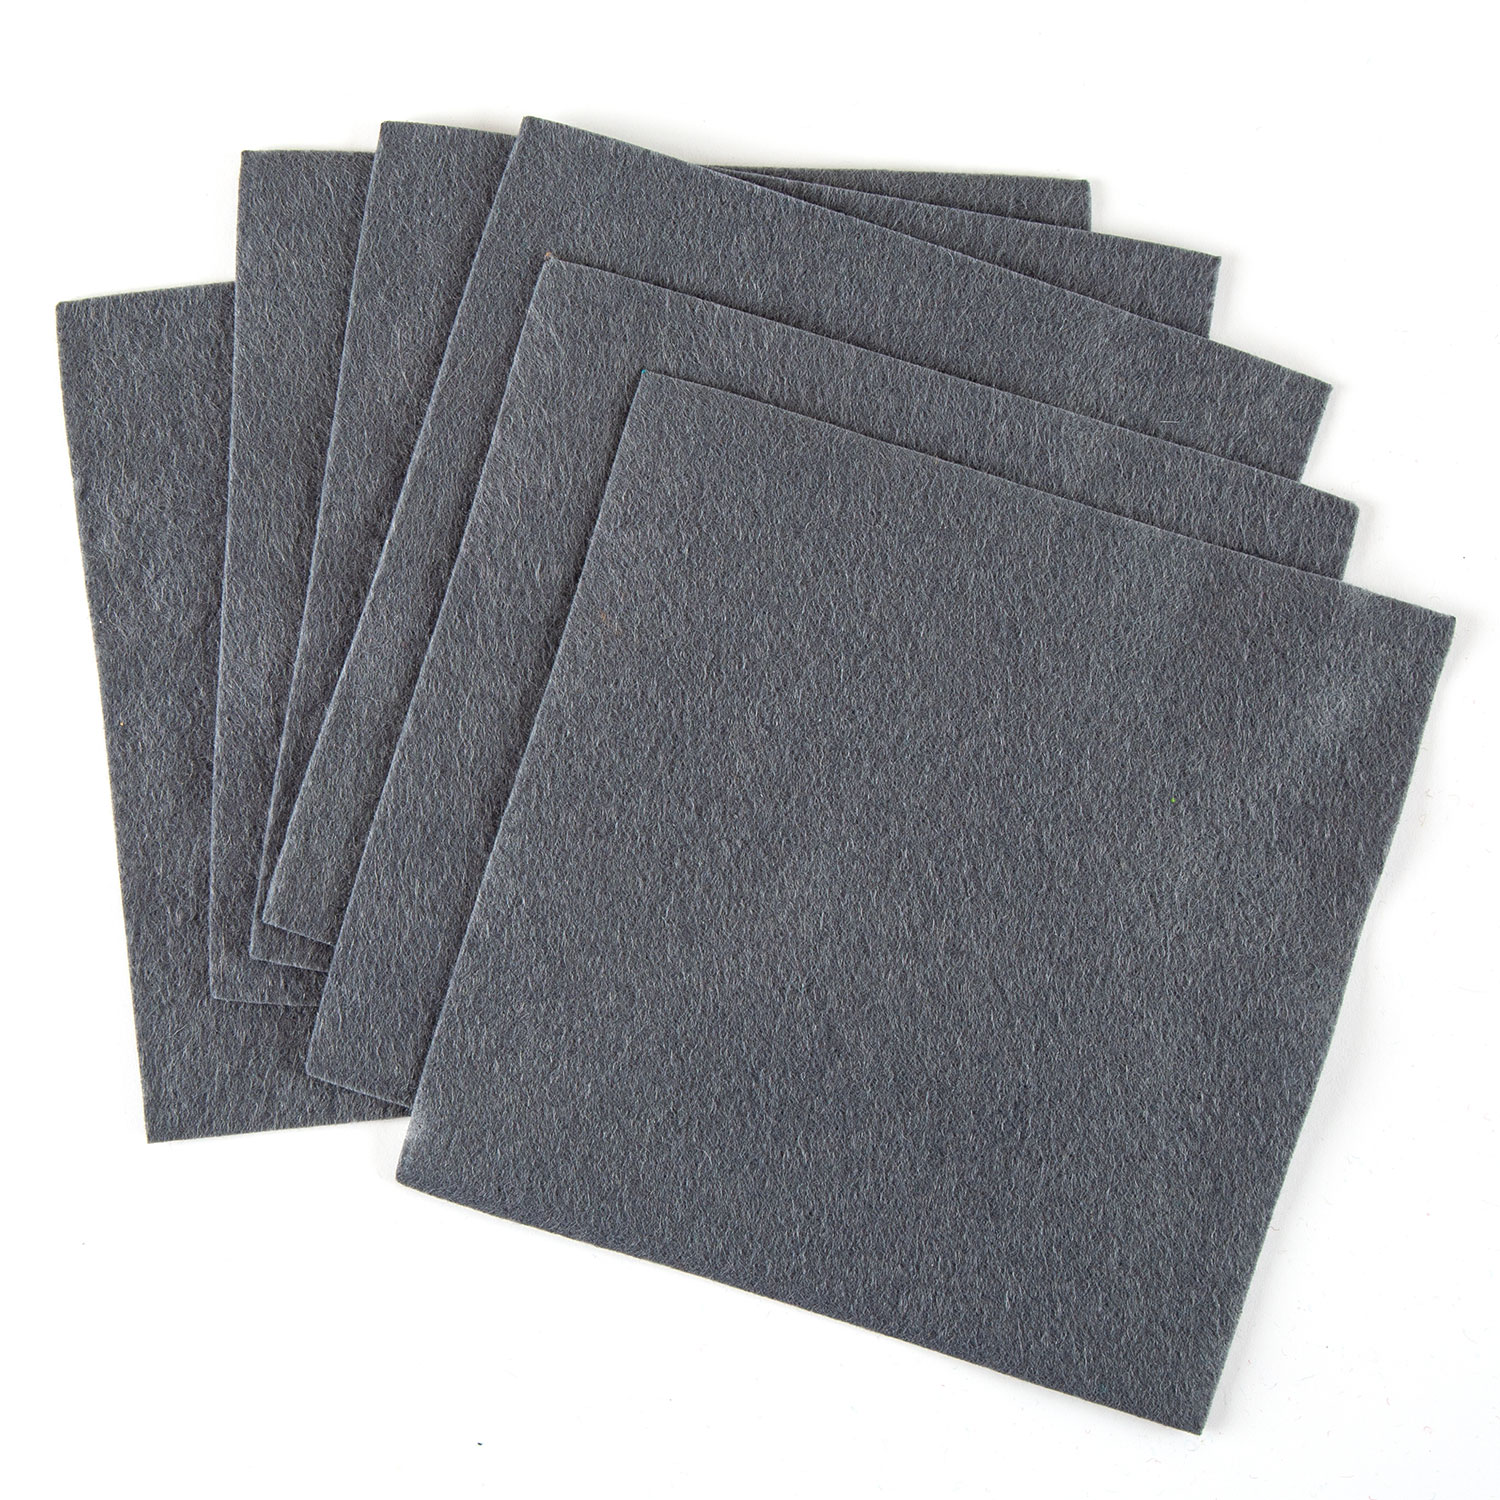 Felt by Clarity Pack of 6 Tile Backers 6x6" Non Adhesive Felt Pick N Mix - Pick any 2 - Just Grey